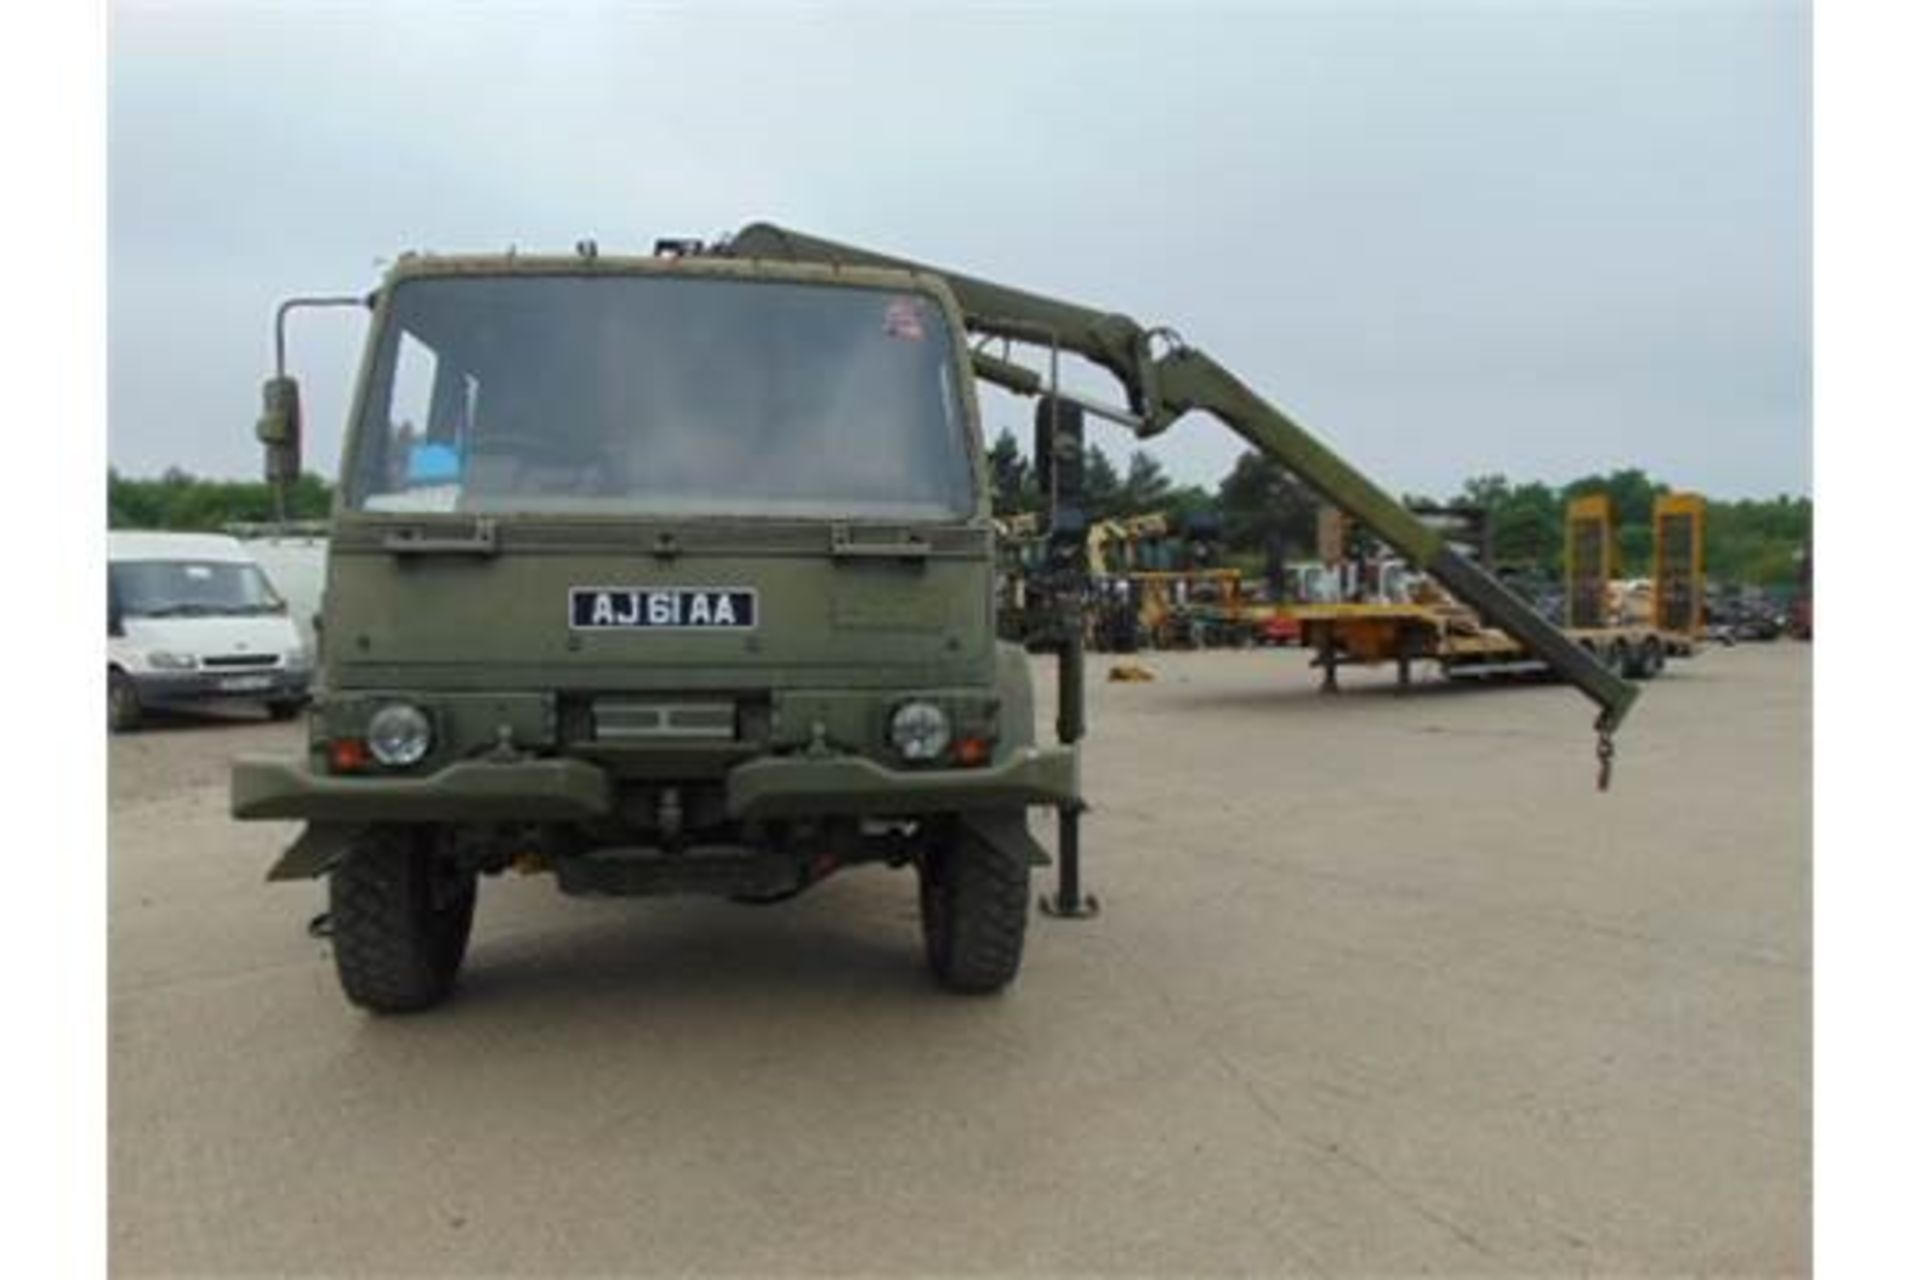 Leyland DAF 4X4 Truck complete with Atlas Crane - Image 2 of 15